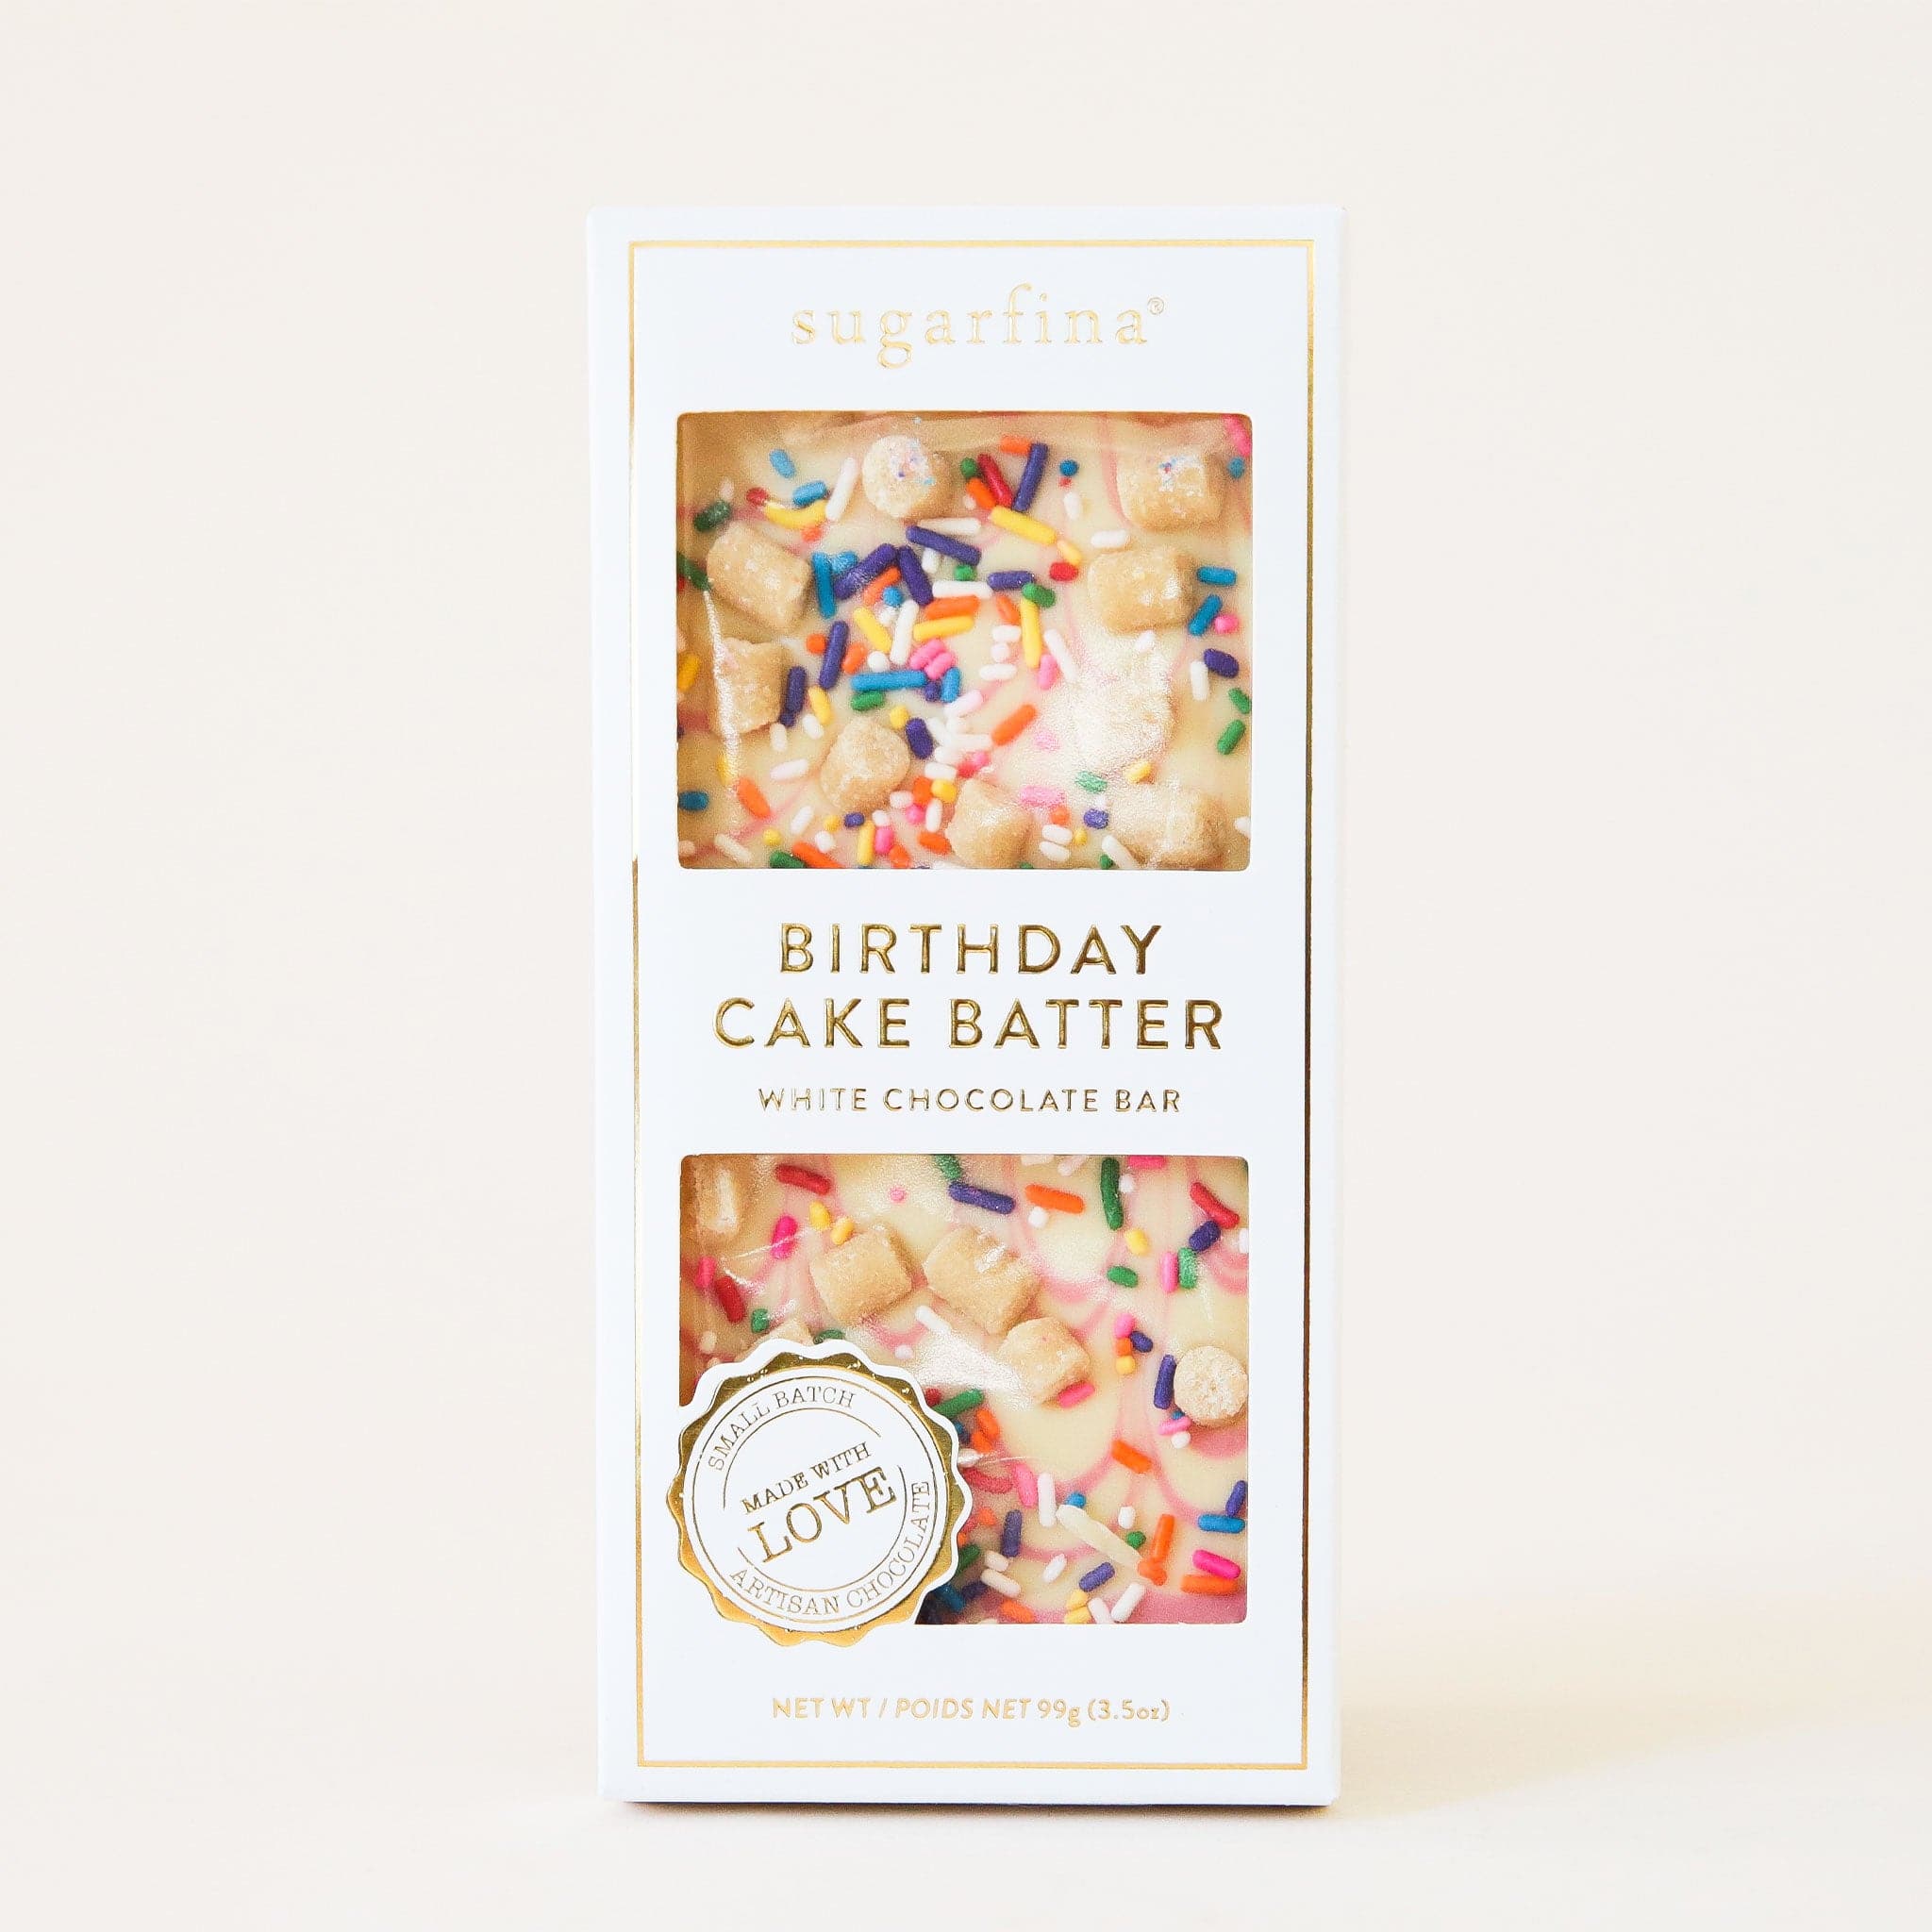 White chocolate bar covered in chunks of cookie dough and rainbow sprinkles. The bar  has white packaging accented with gold foil detailing that reads &#39;Birthday Cake Batter White Chocolate Bar&#39;.